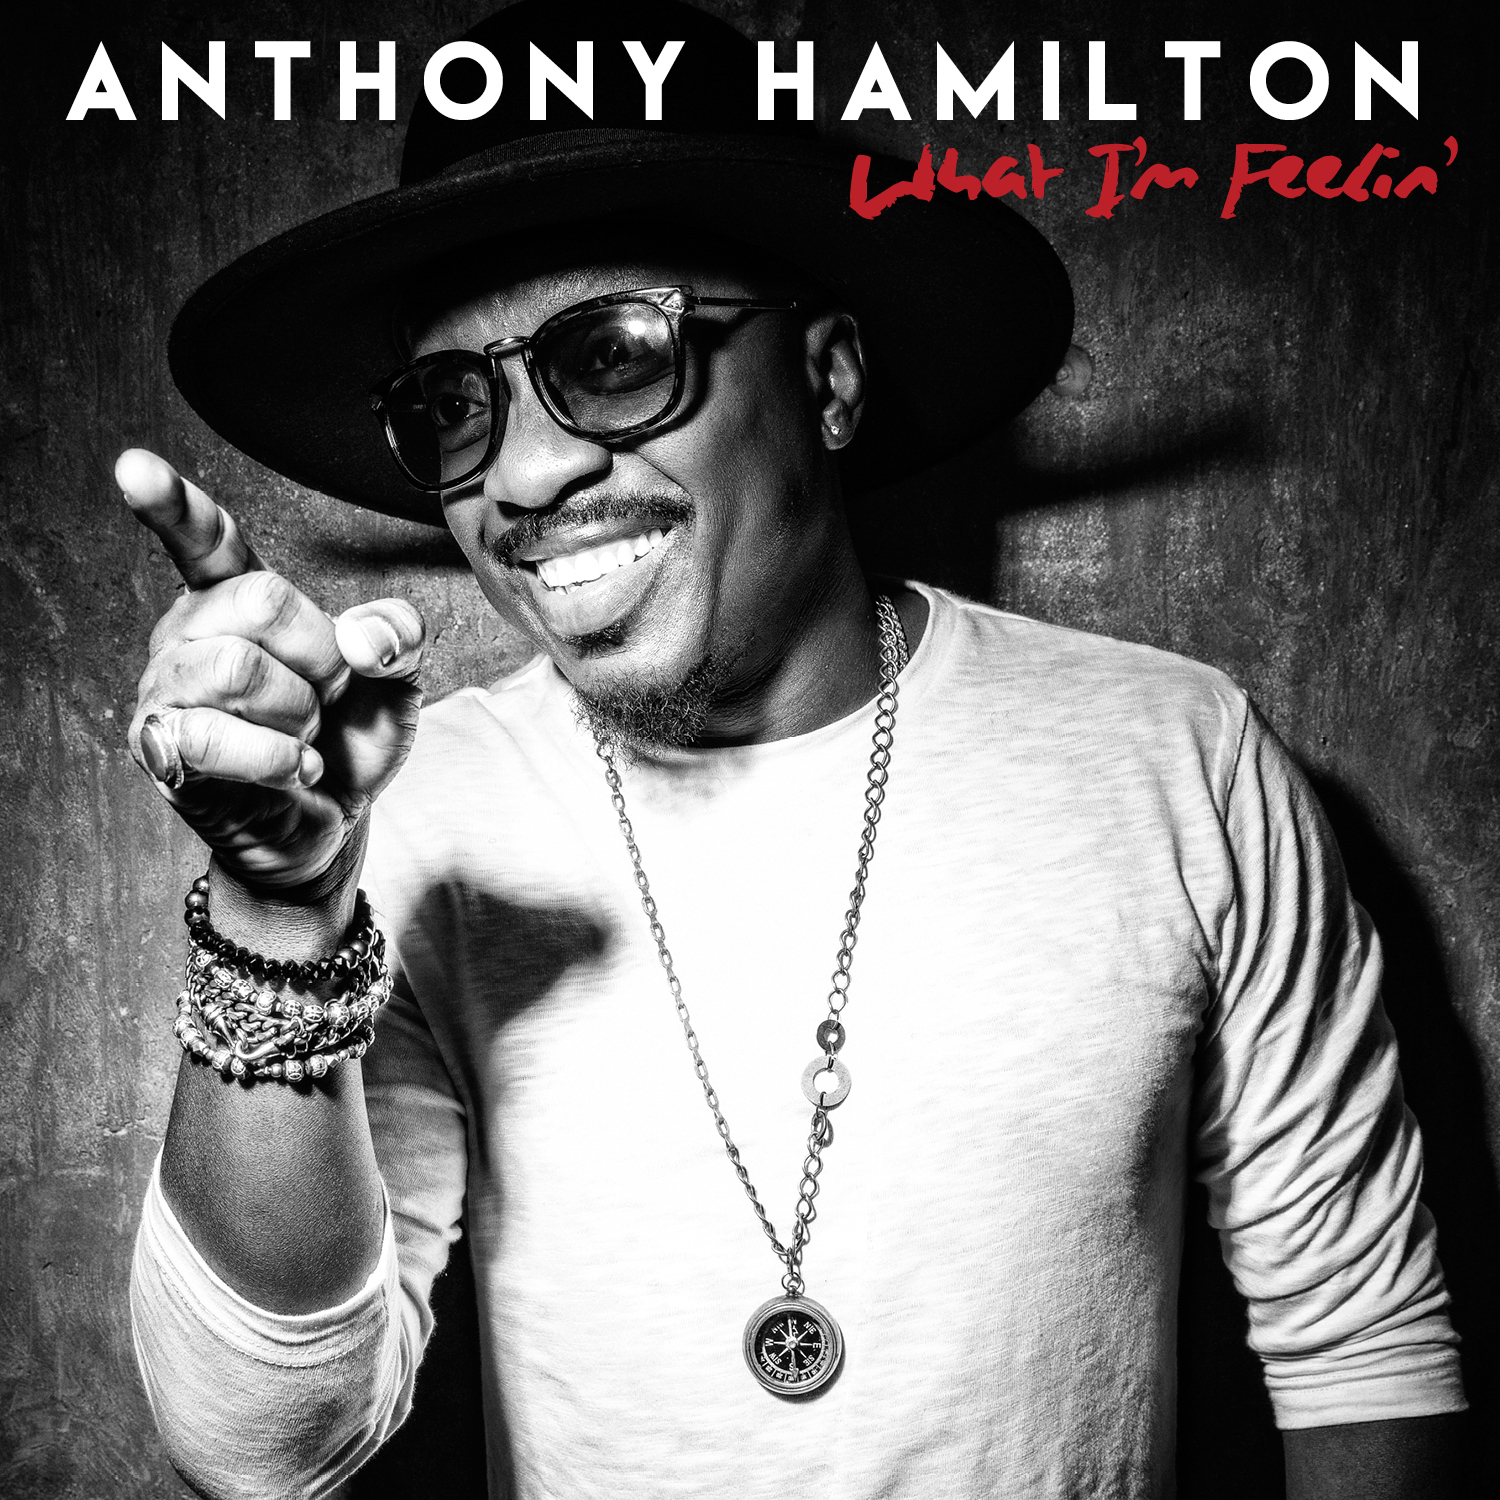 ANTHONY HAMILTON SET TO RELEASE HIS NEW ALBUM, WHAT I'M FEELIN' ON MARCH 25TH